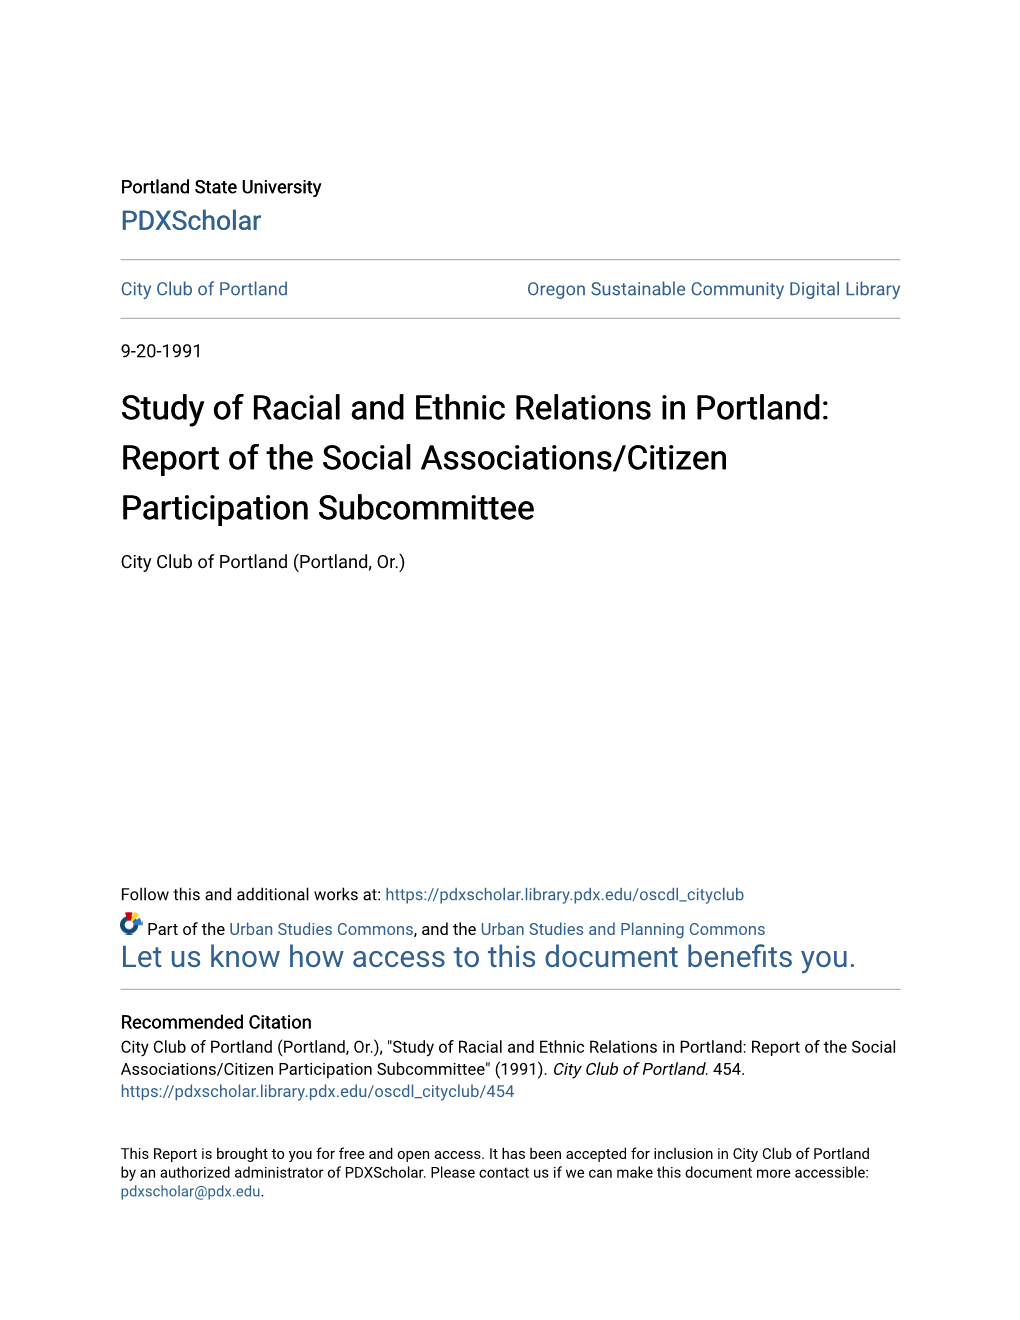 Study of Racial and Ethnic Relations in Portland: Report of the Social Associations/Citizen Participation Subcommittee